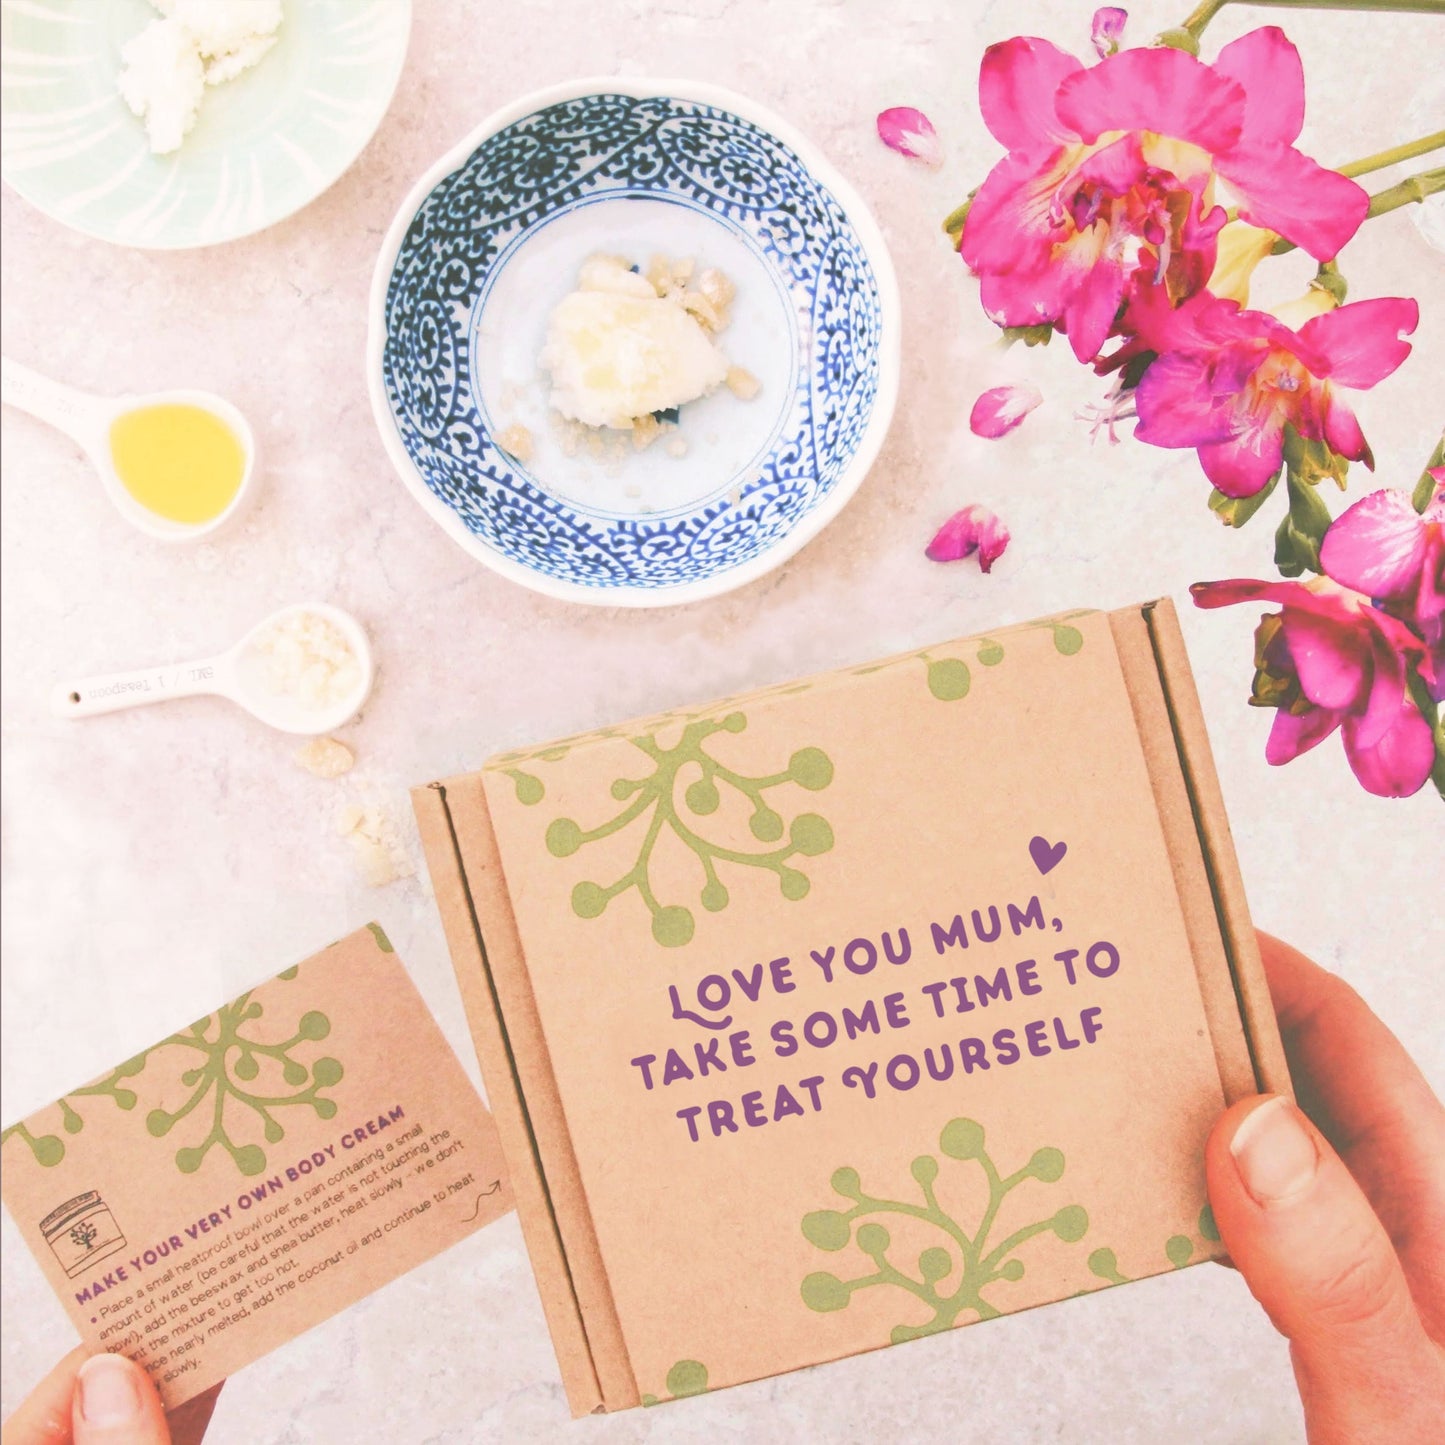 self care gift for mum with gift message 'love you mum, take some time to treat yourself'